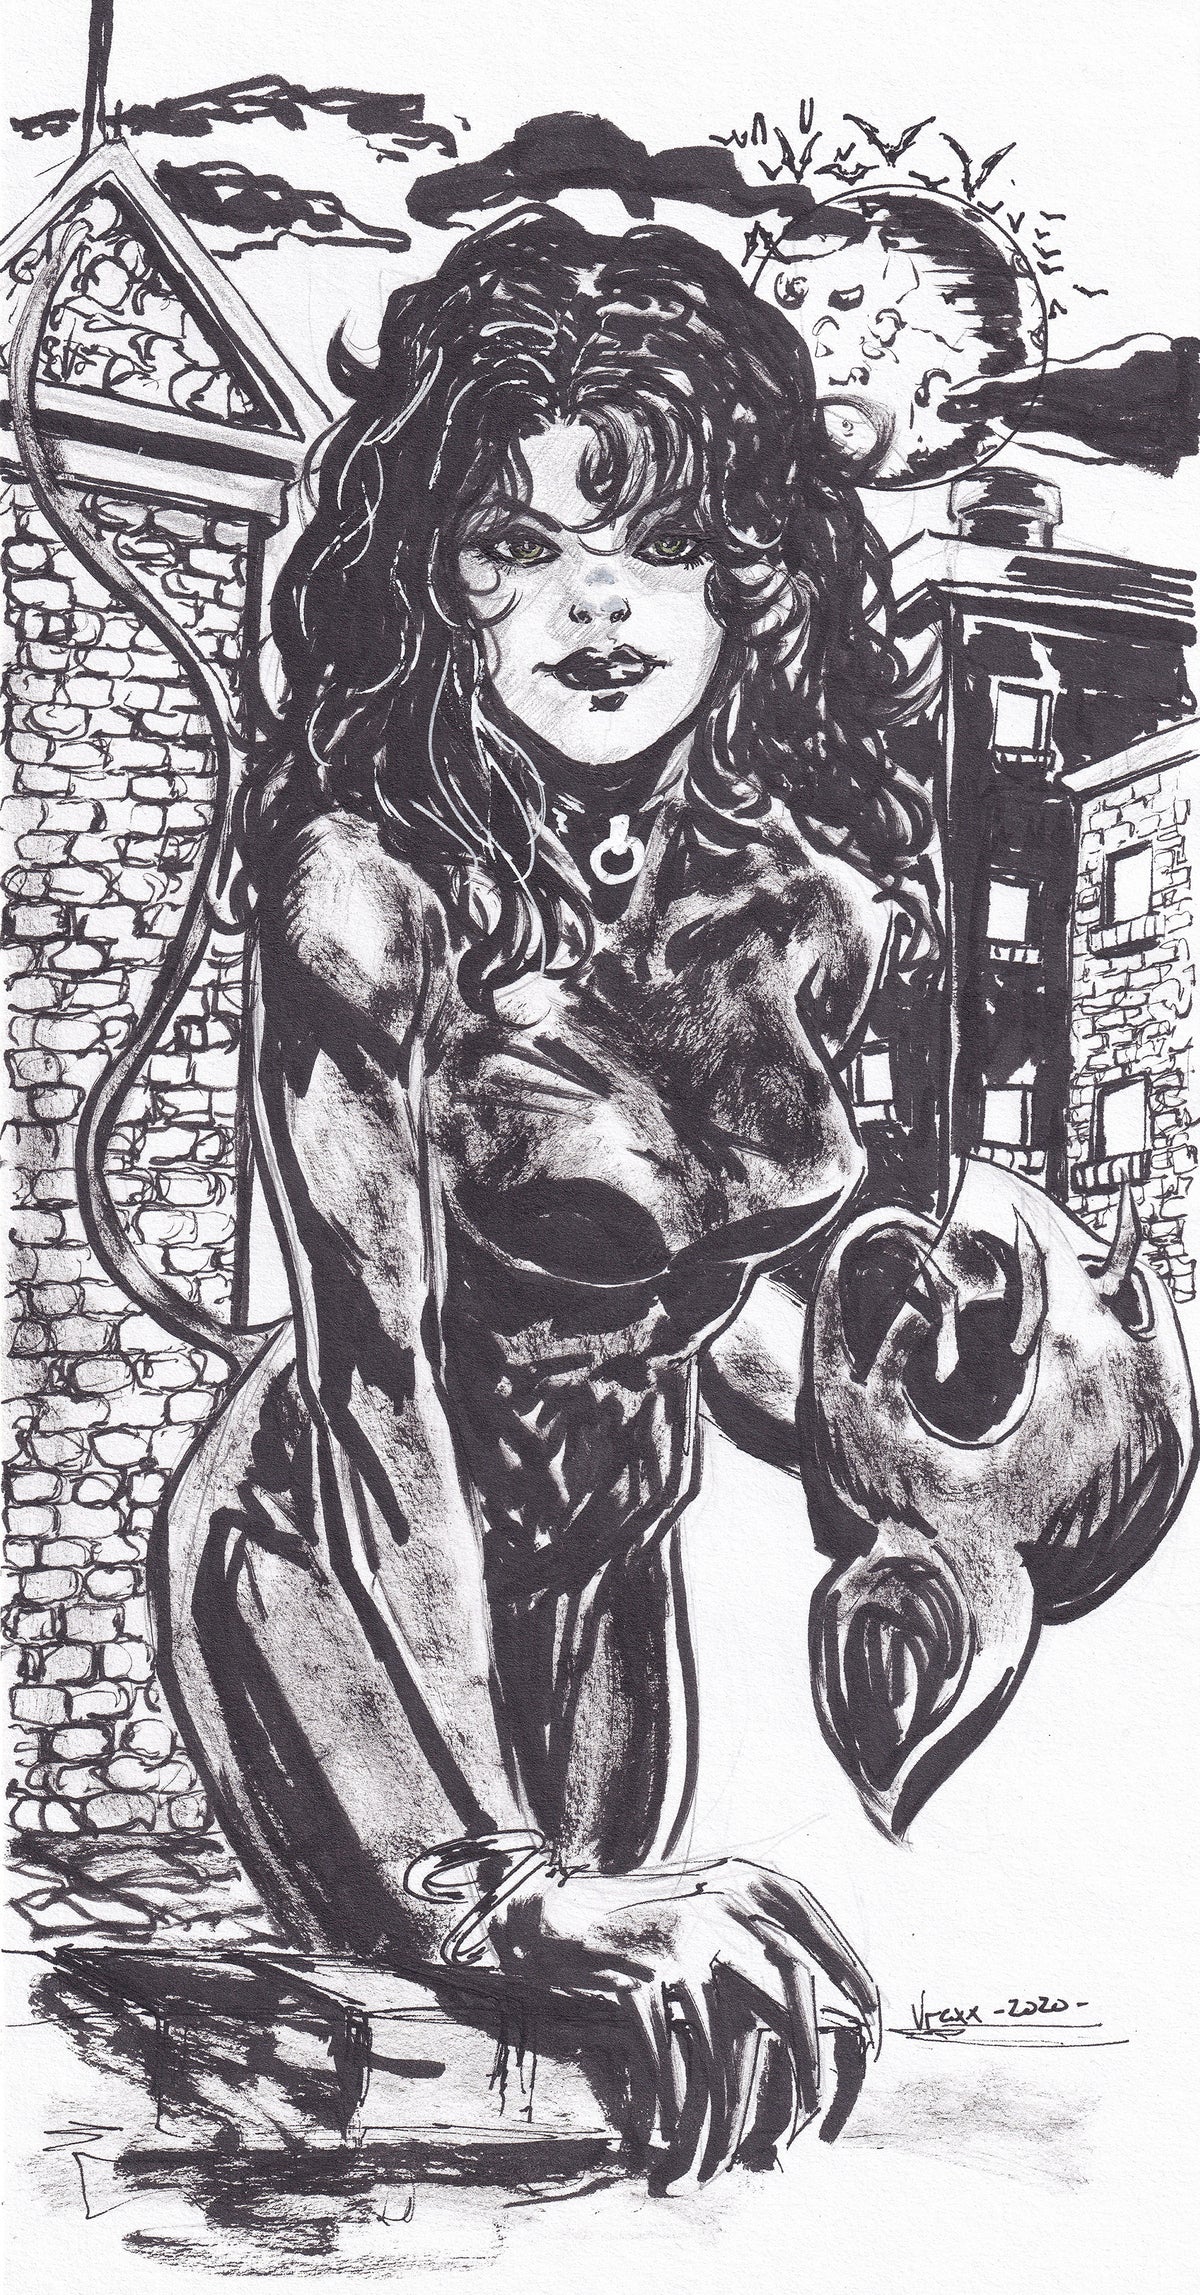 Catwoman - 6" x 11 1/2" - Original Art sold by Stronghold Collectibles